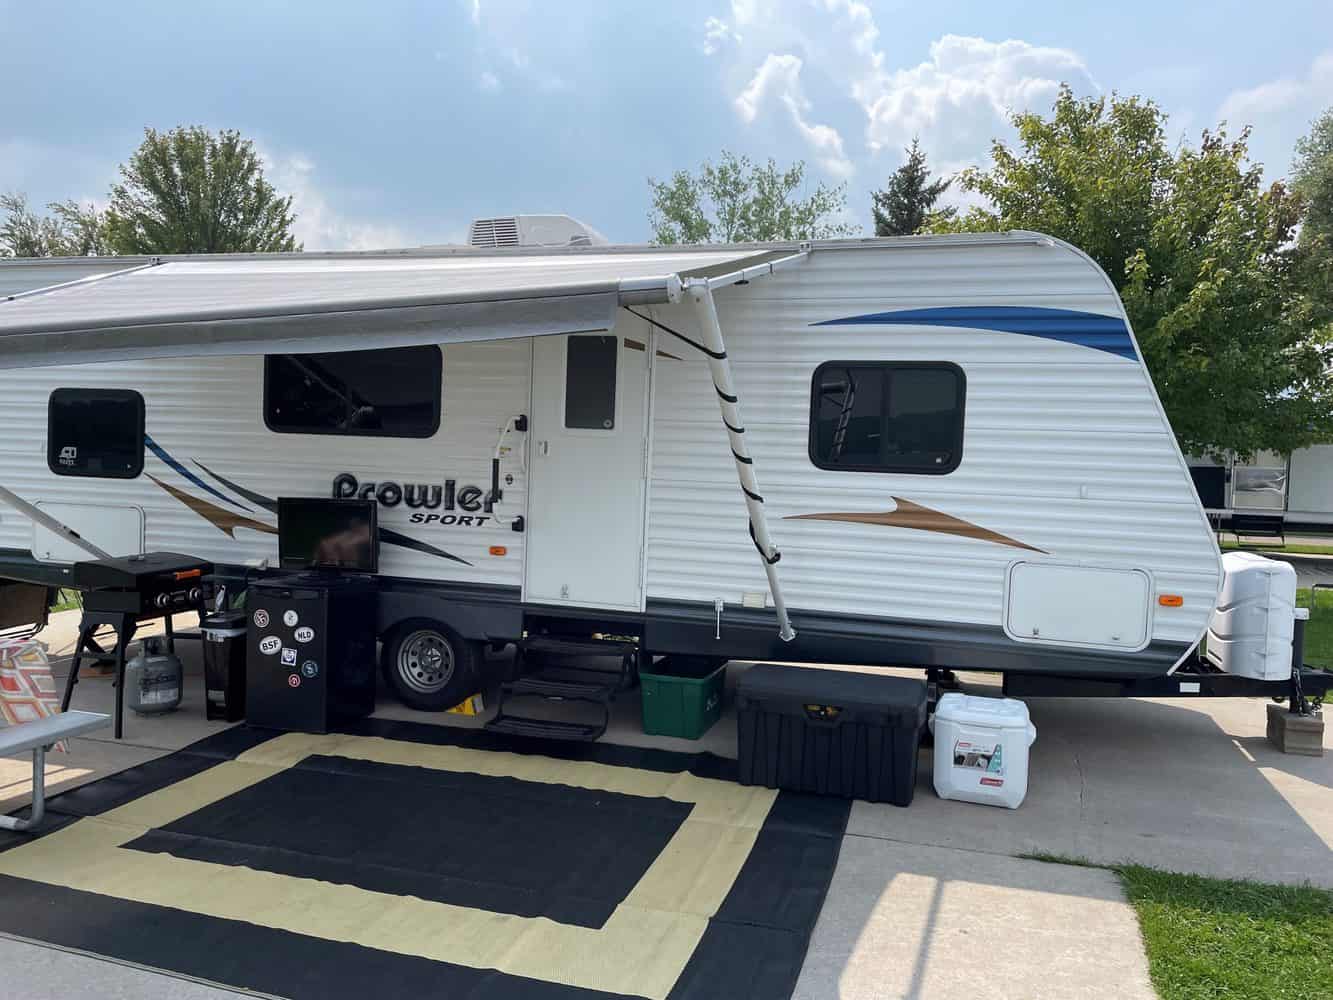 Average Price Of A Travel Trailer Based On Size